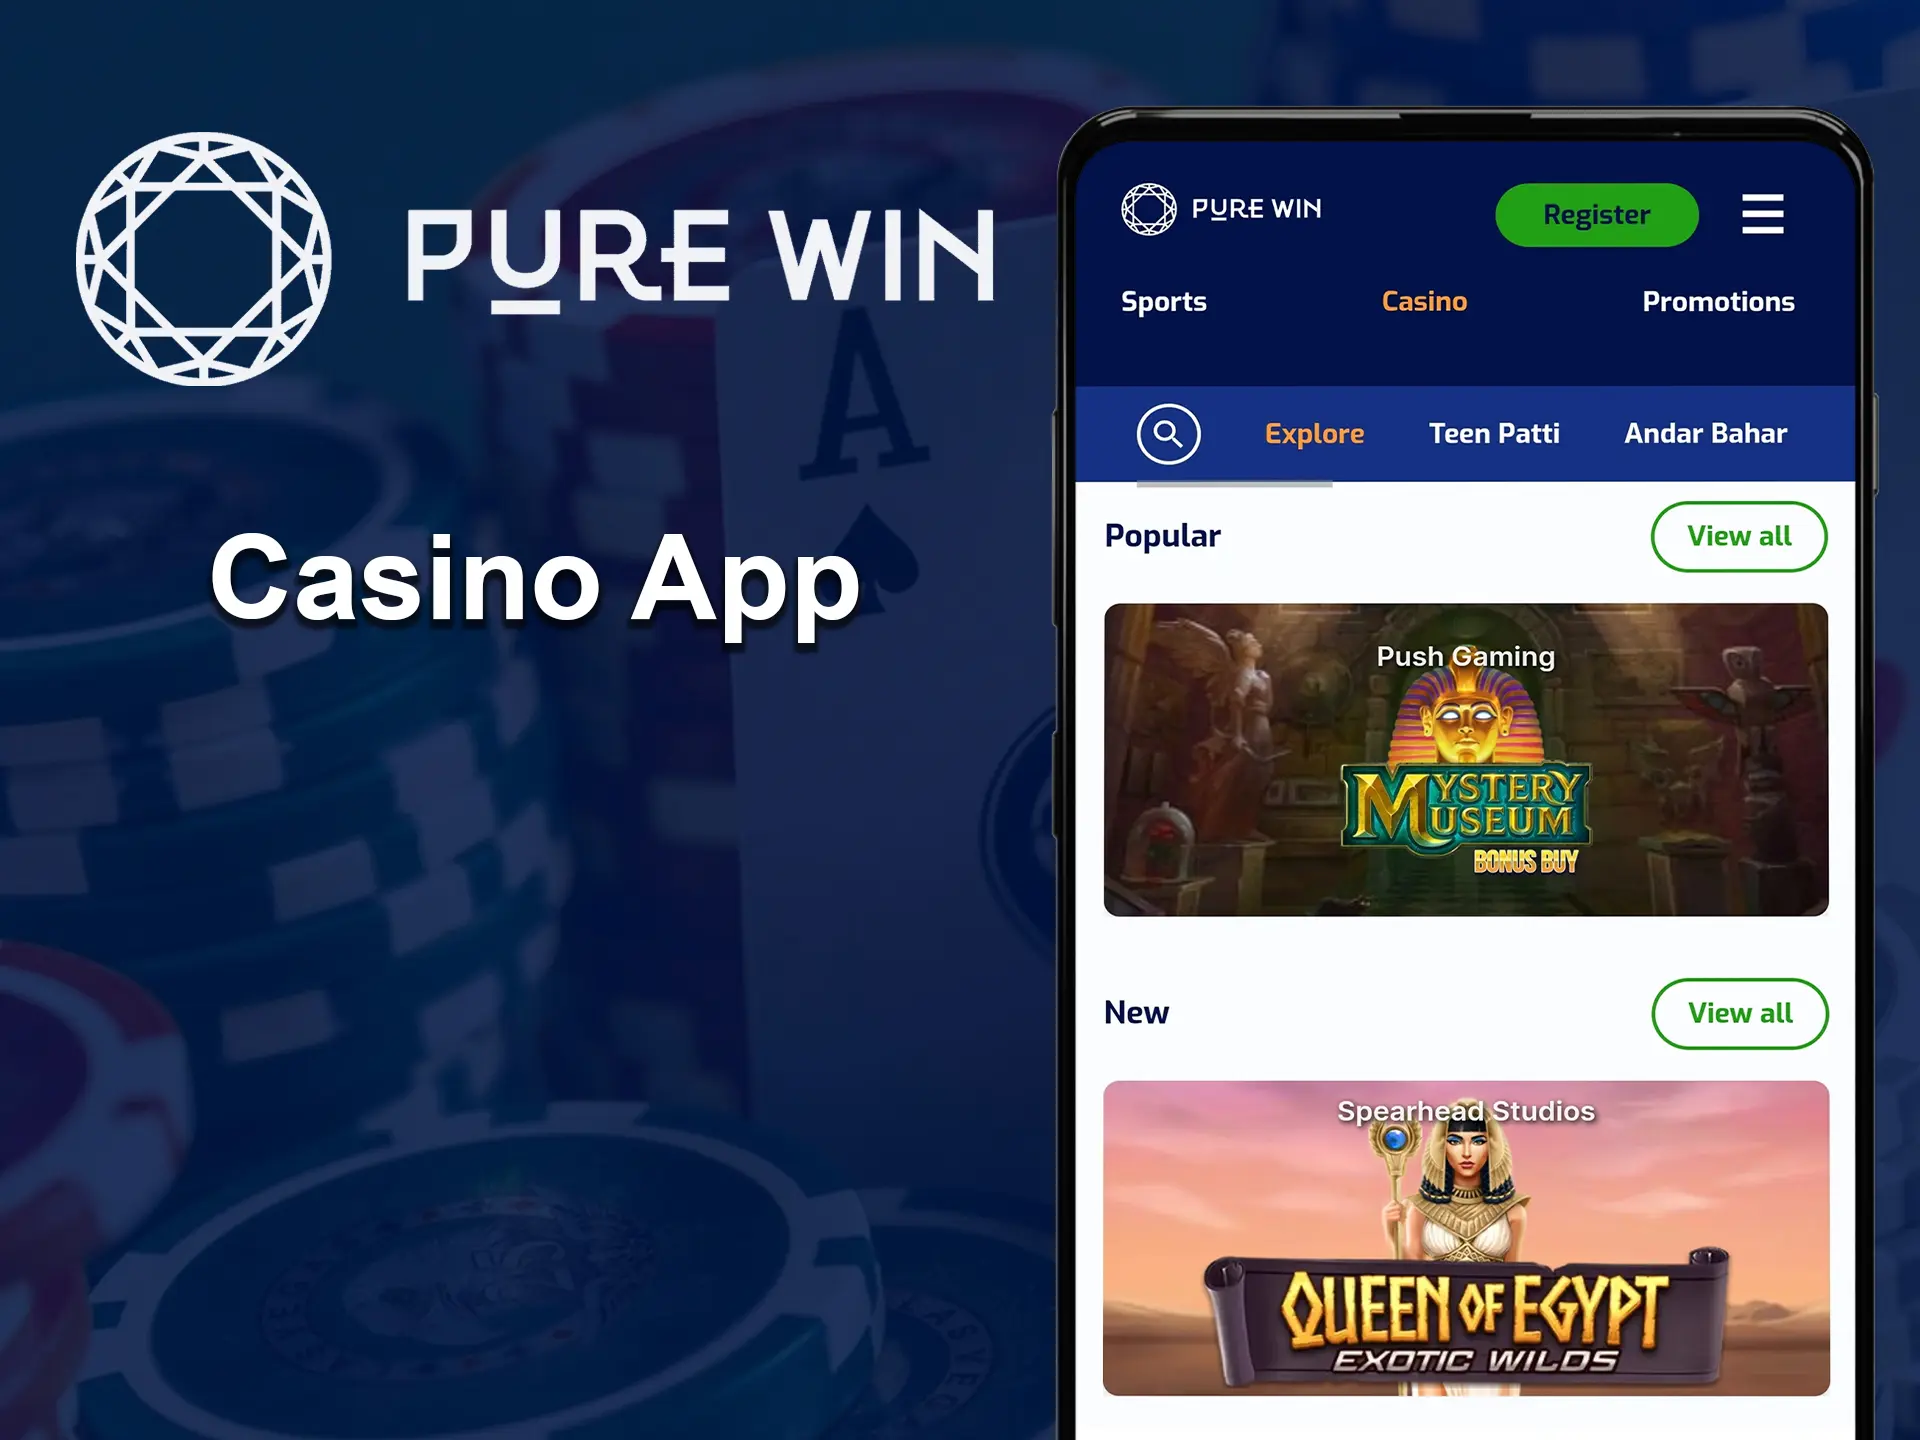 Download the app by going to the official Pure Win website and start playing from your mobile device.